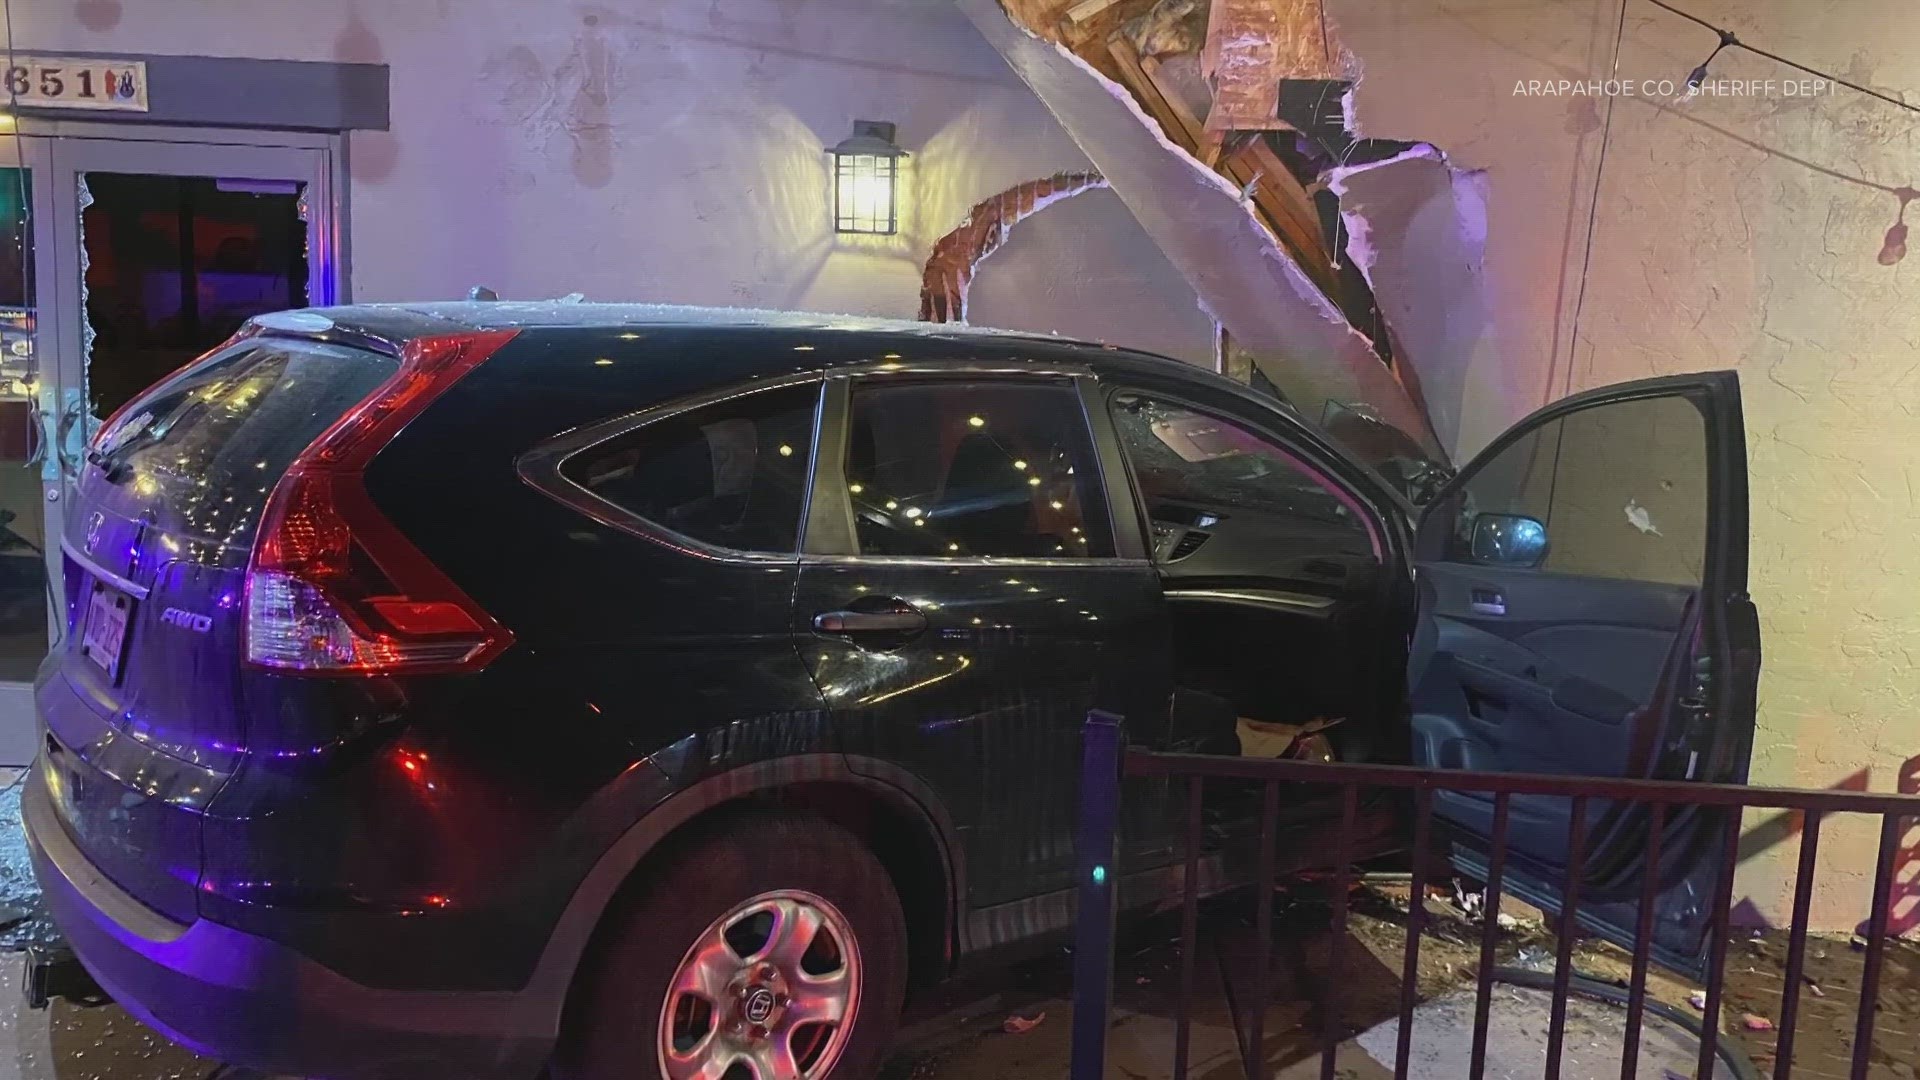 The Arapahoe County Sheriff's Office said a "highly intoxicated" driver crashed into El Señor Sol early Saturday morning.